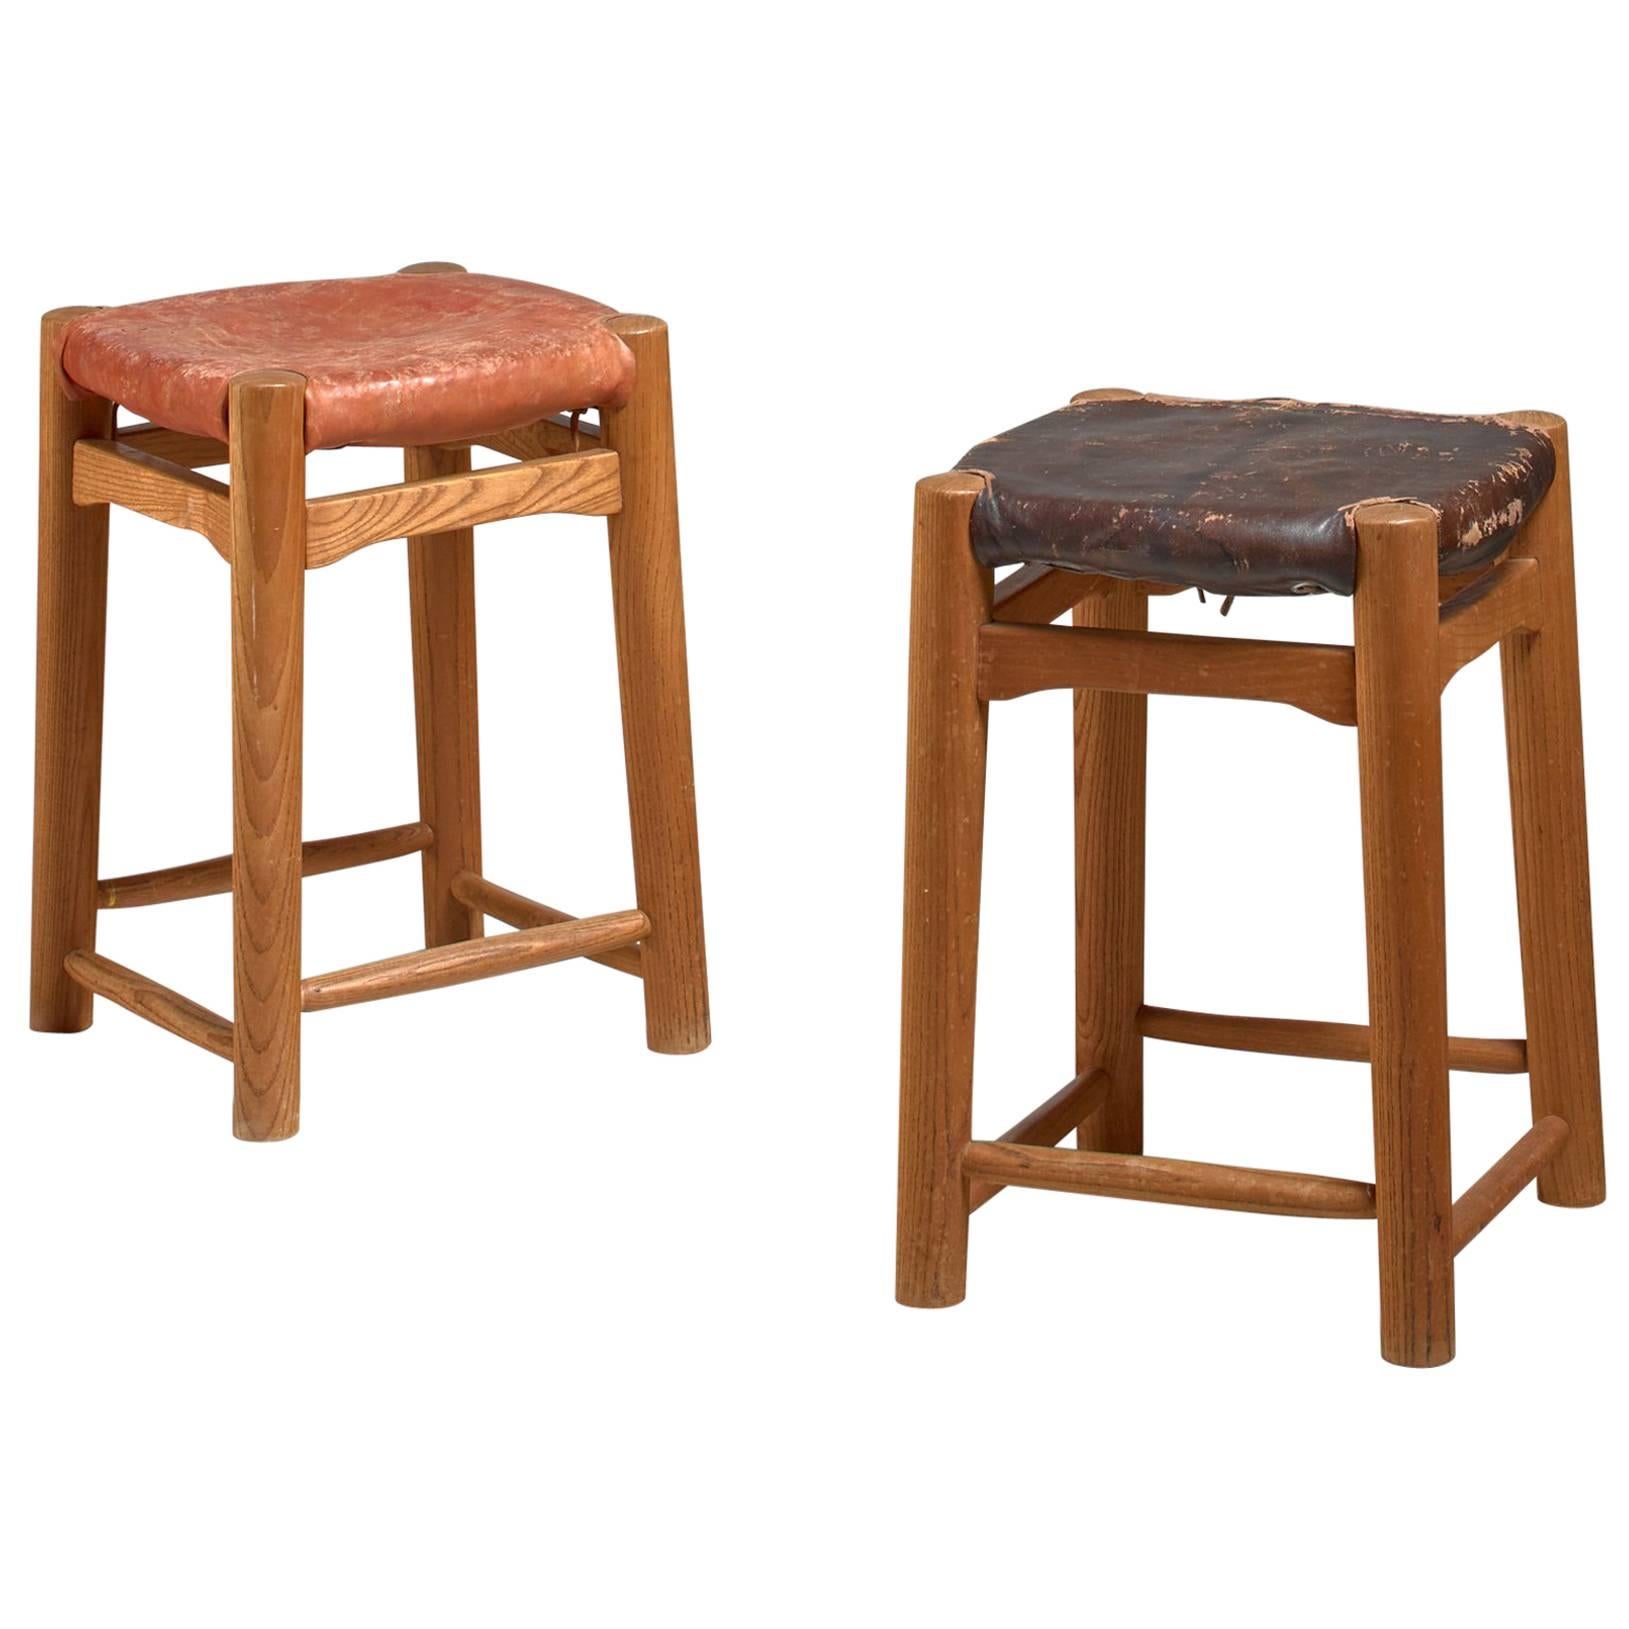 Pair of Oak Stools with Leather Seatpad, France, 1950s For Sale